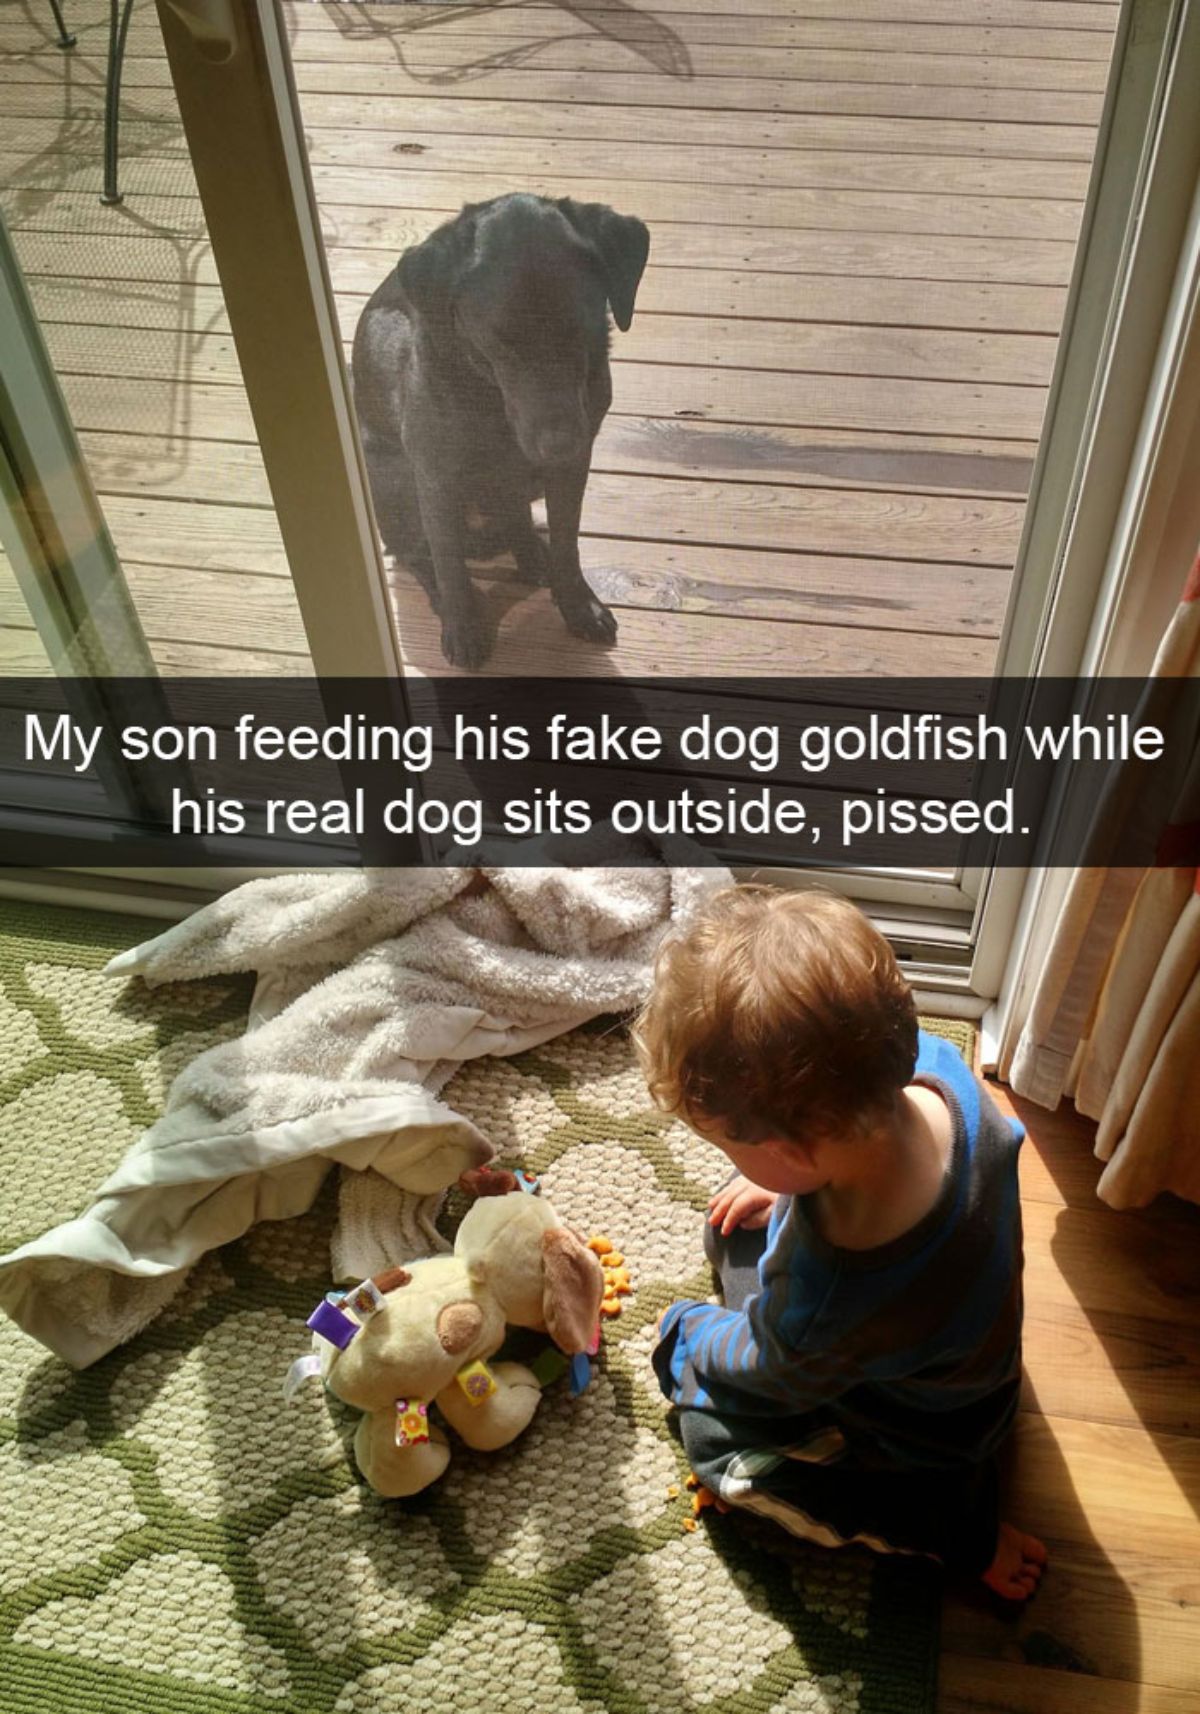 black labrador sitting on a wooden floor watching a little girl feeding a dog stuffed toy through a screen door with a caption saying my son feeding his fake dog goldfish while his real dog sits outside, pissed